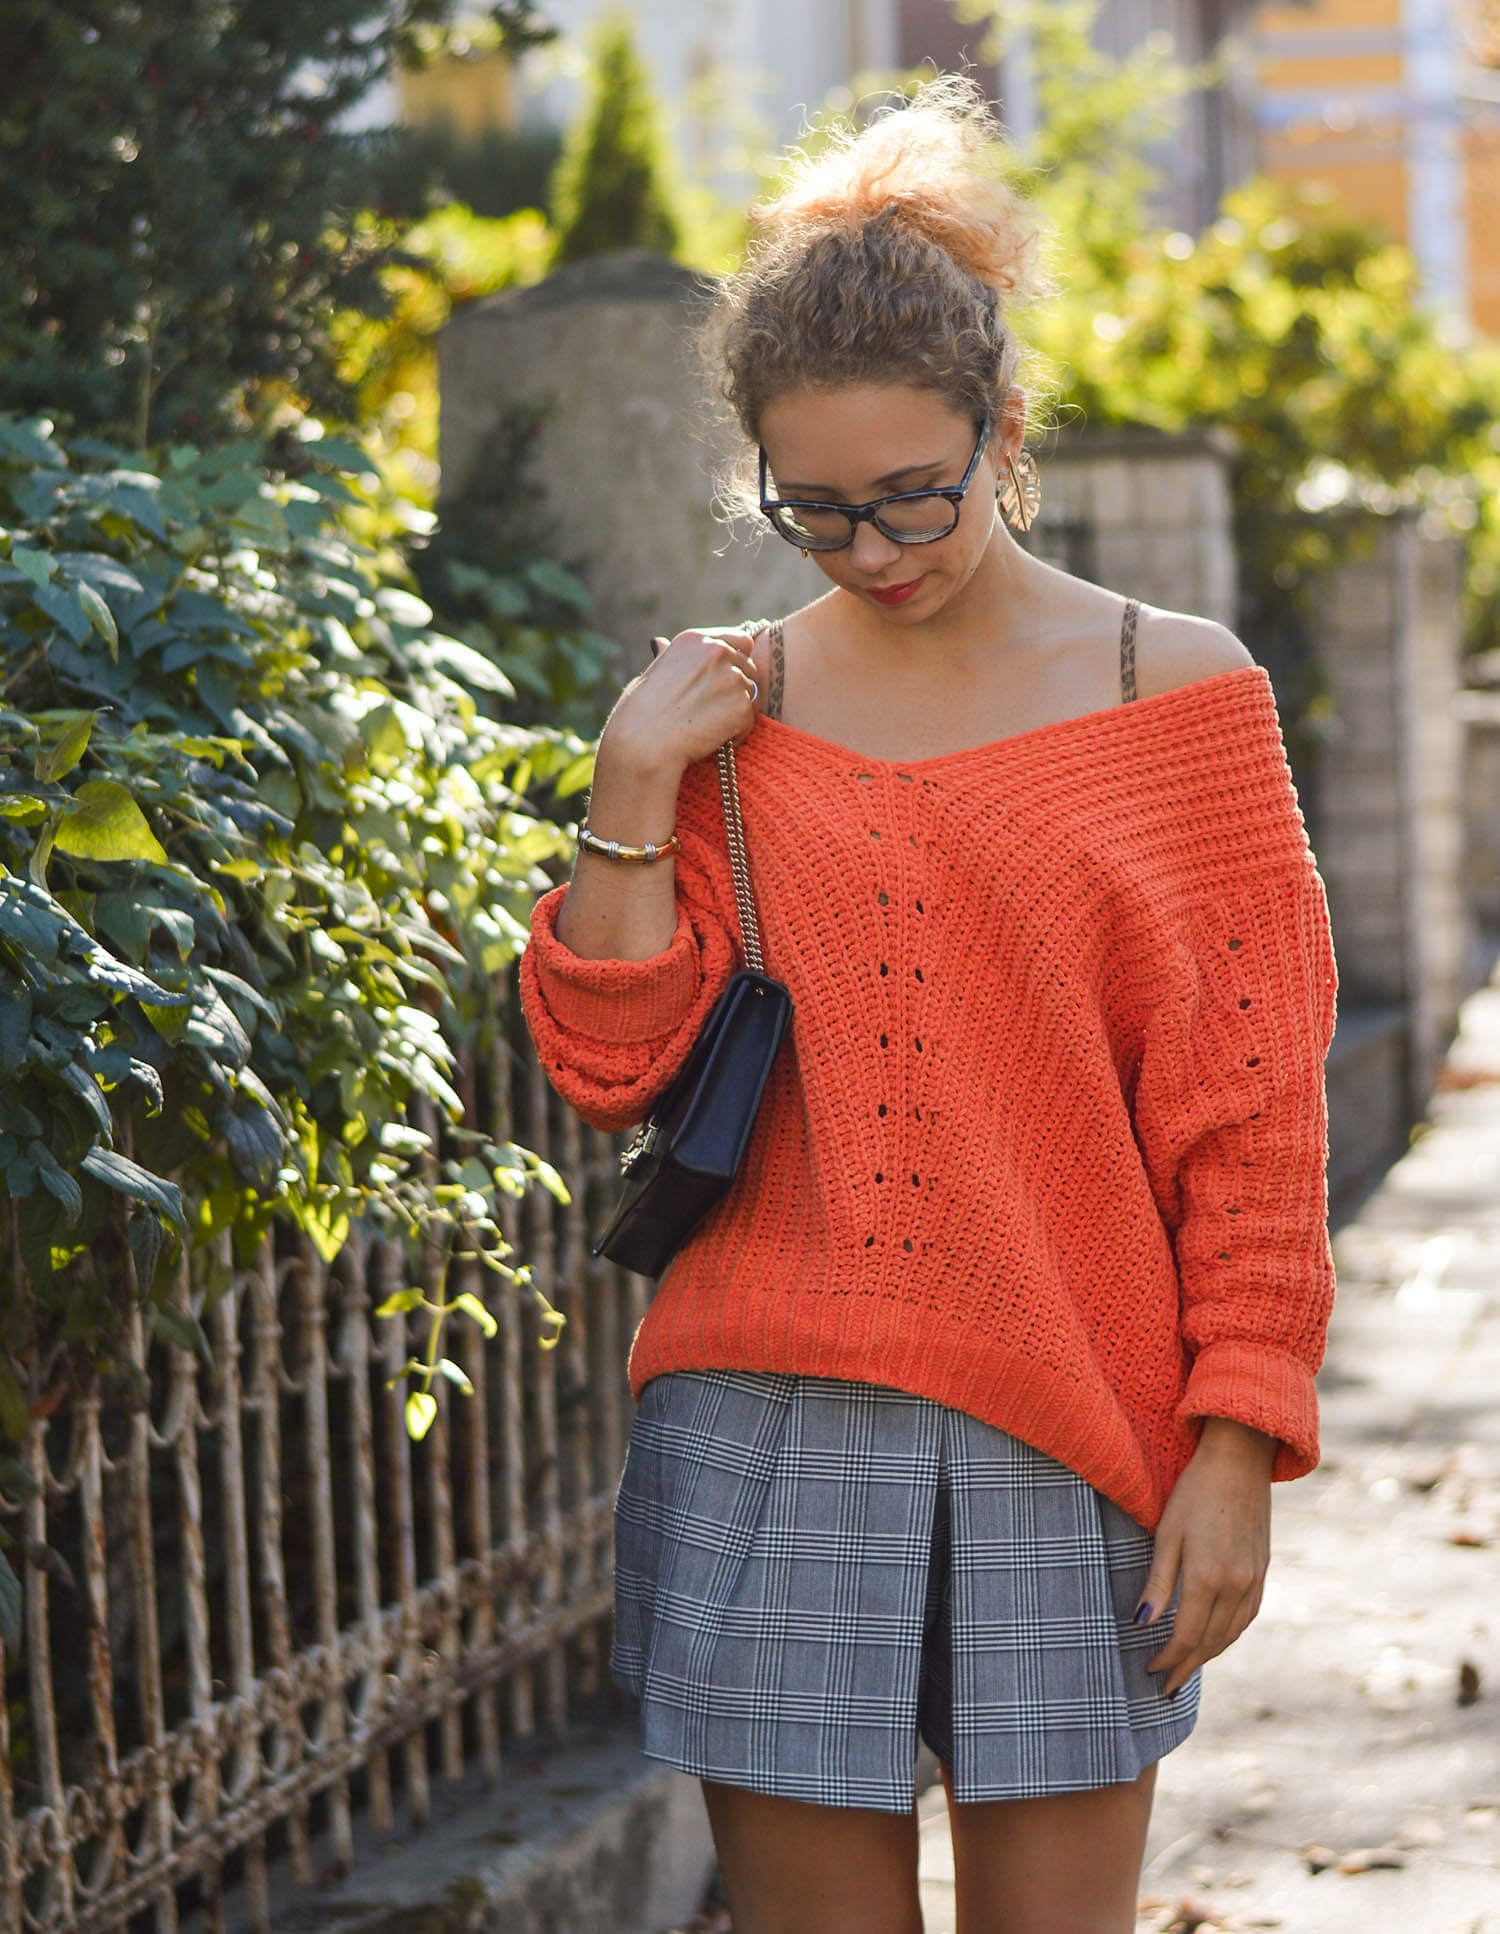 Pumpkin-Colored-Sweater-Monstera-Earrings-and-Shorts-Indian-Summer-Germany-Kationette-Fashionblogger